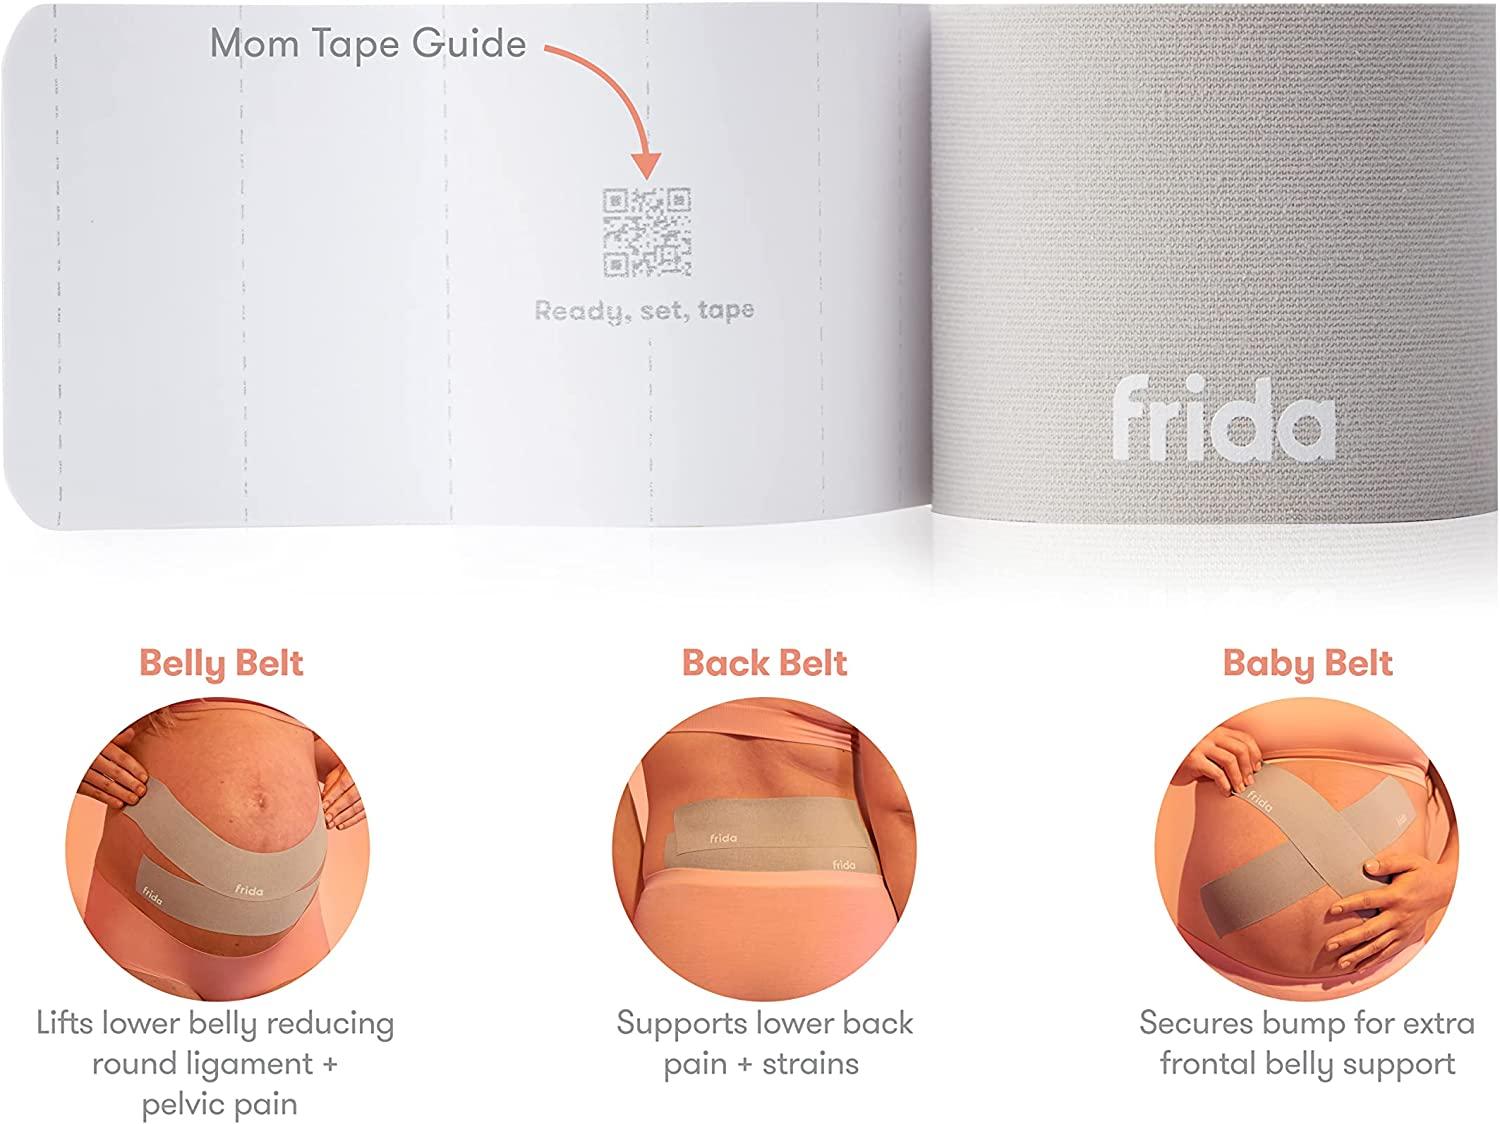 Frida Mom Pregnancy Belly Band Tape, Discreet Kinesiology Tape for  Pregnant Skin, Maternity Belly Support, Pain + Strain Relief